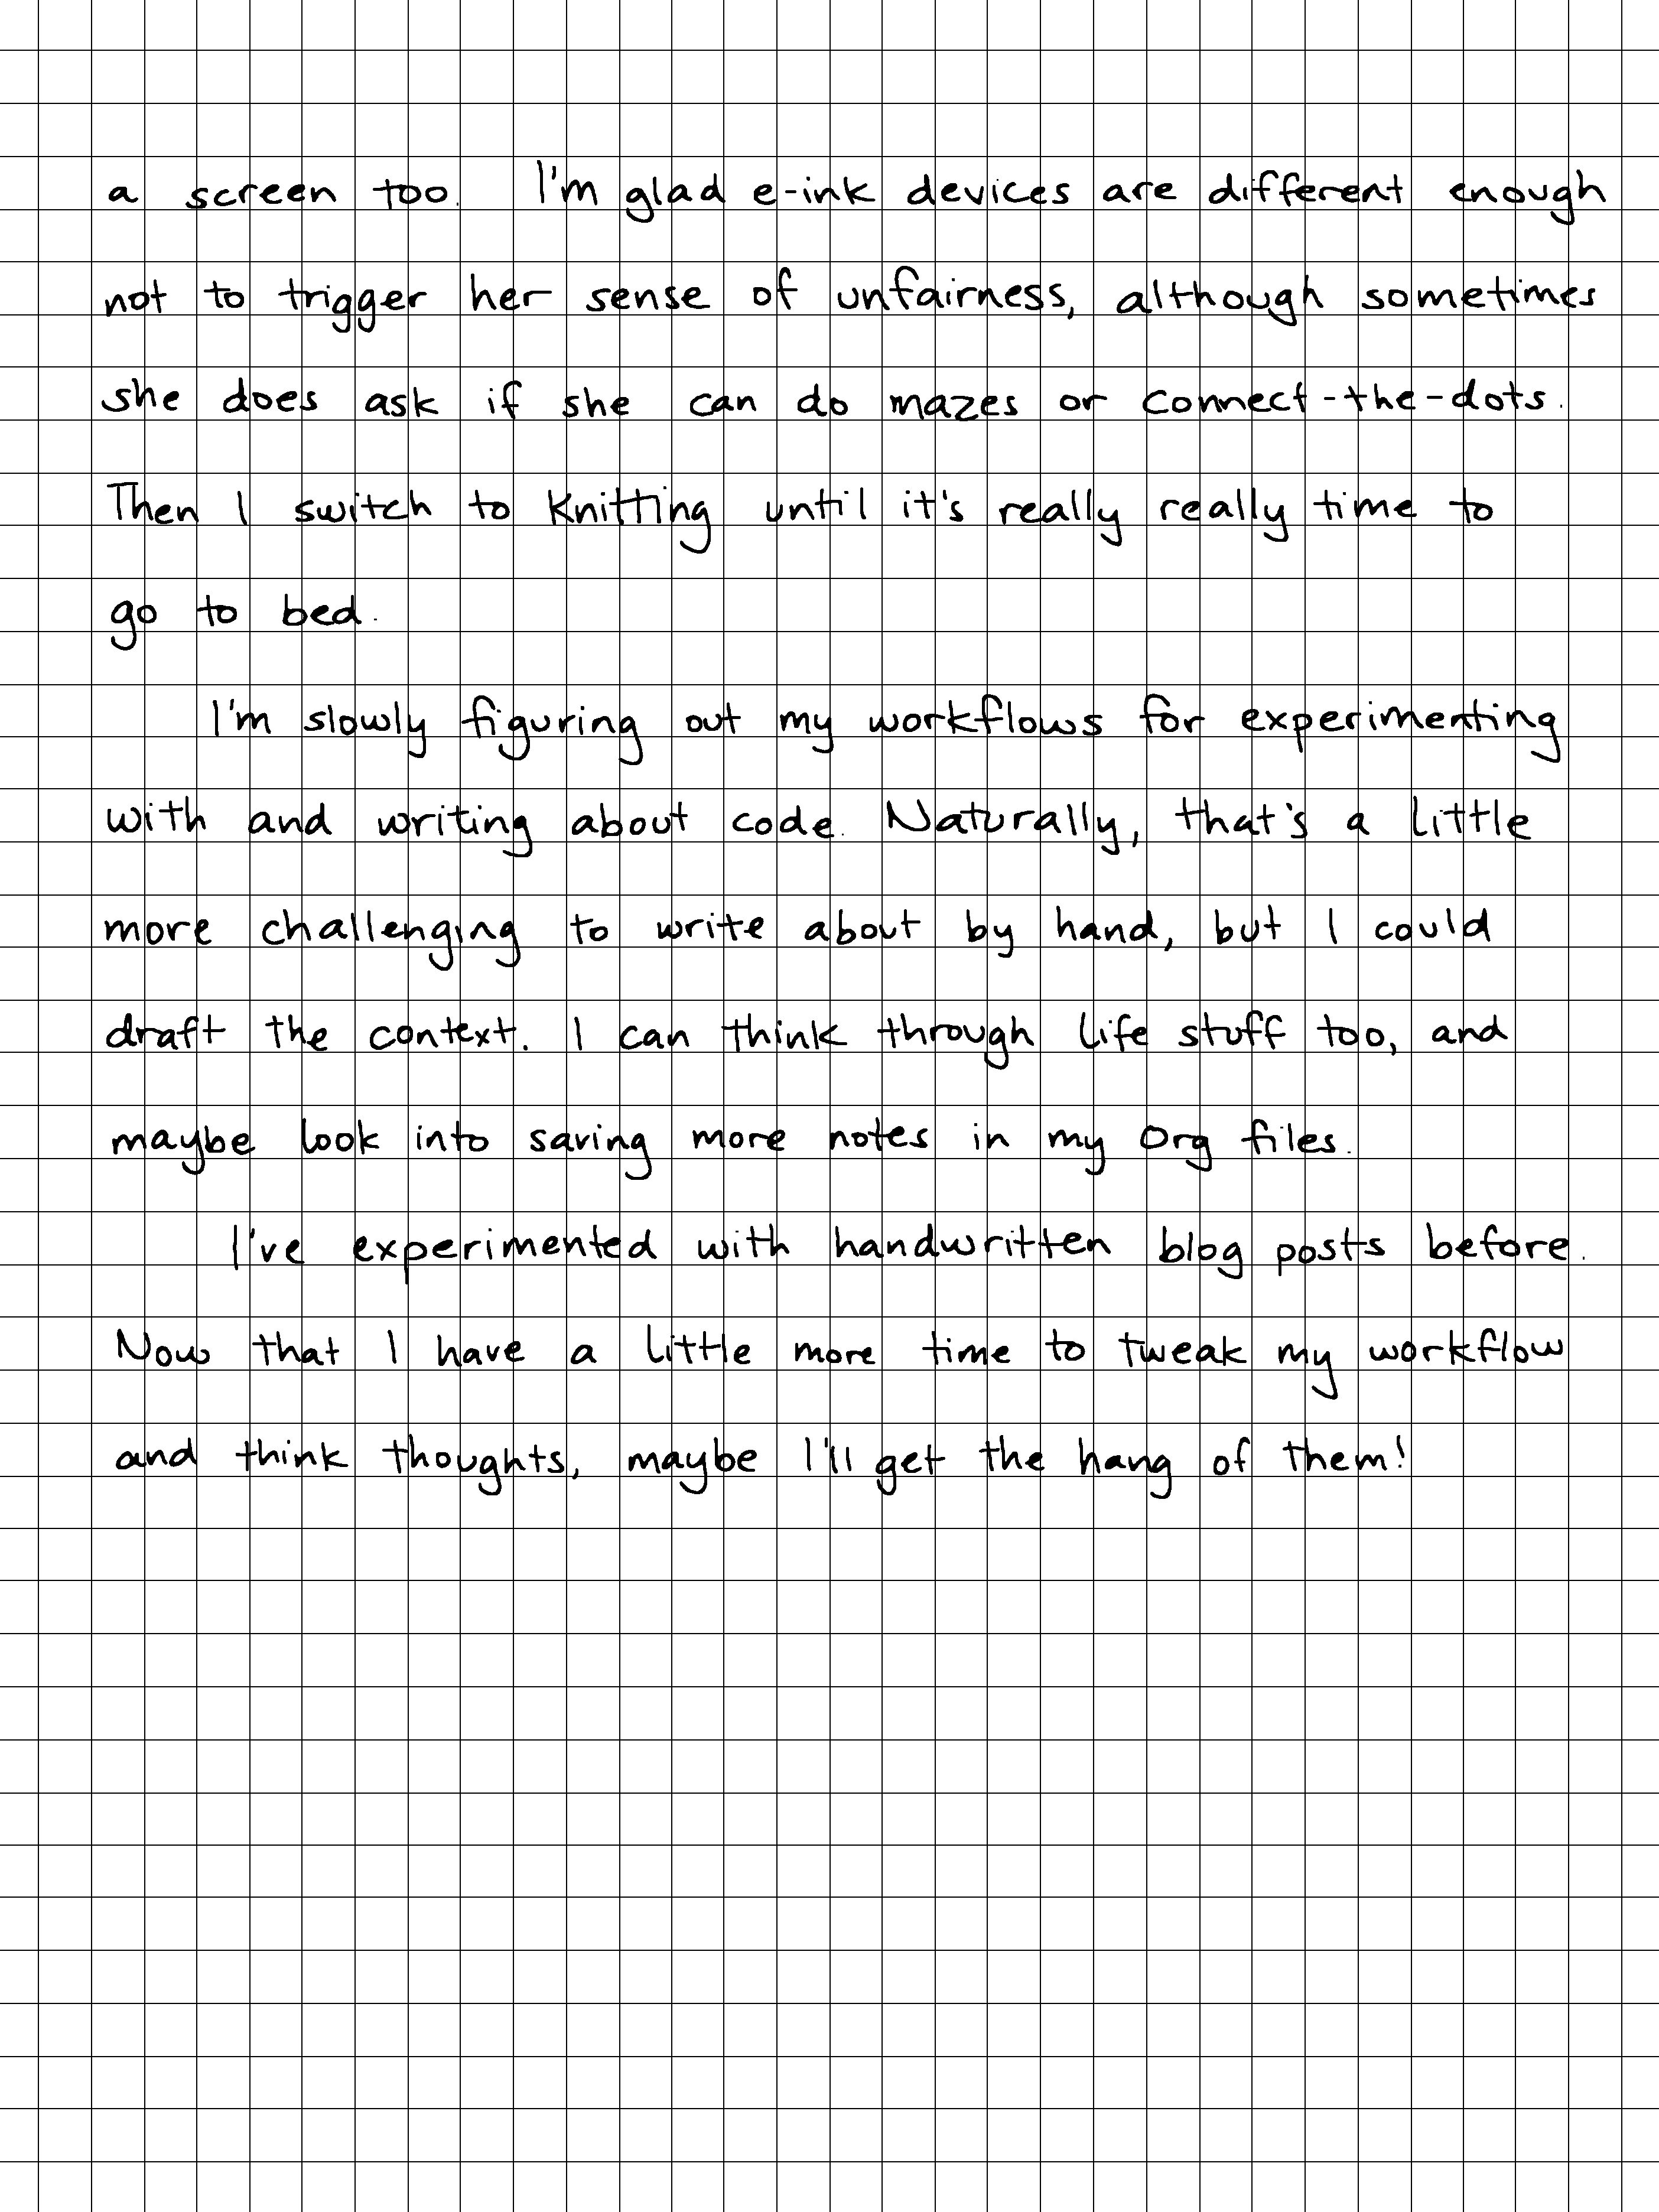 "The second page of my handwritten post"